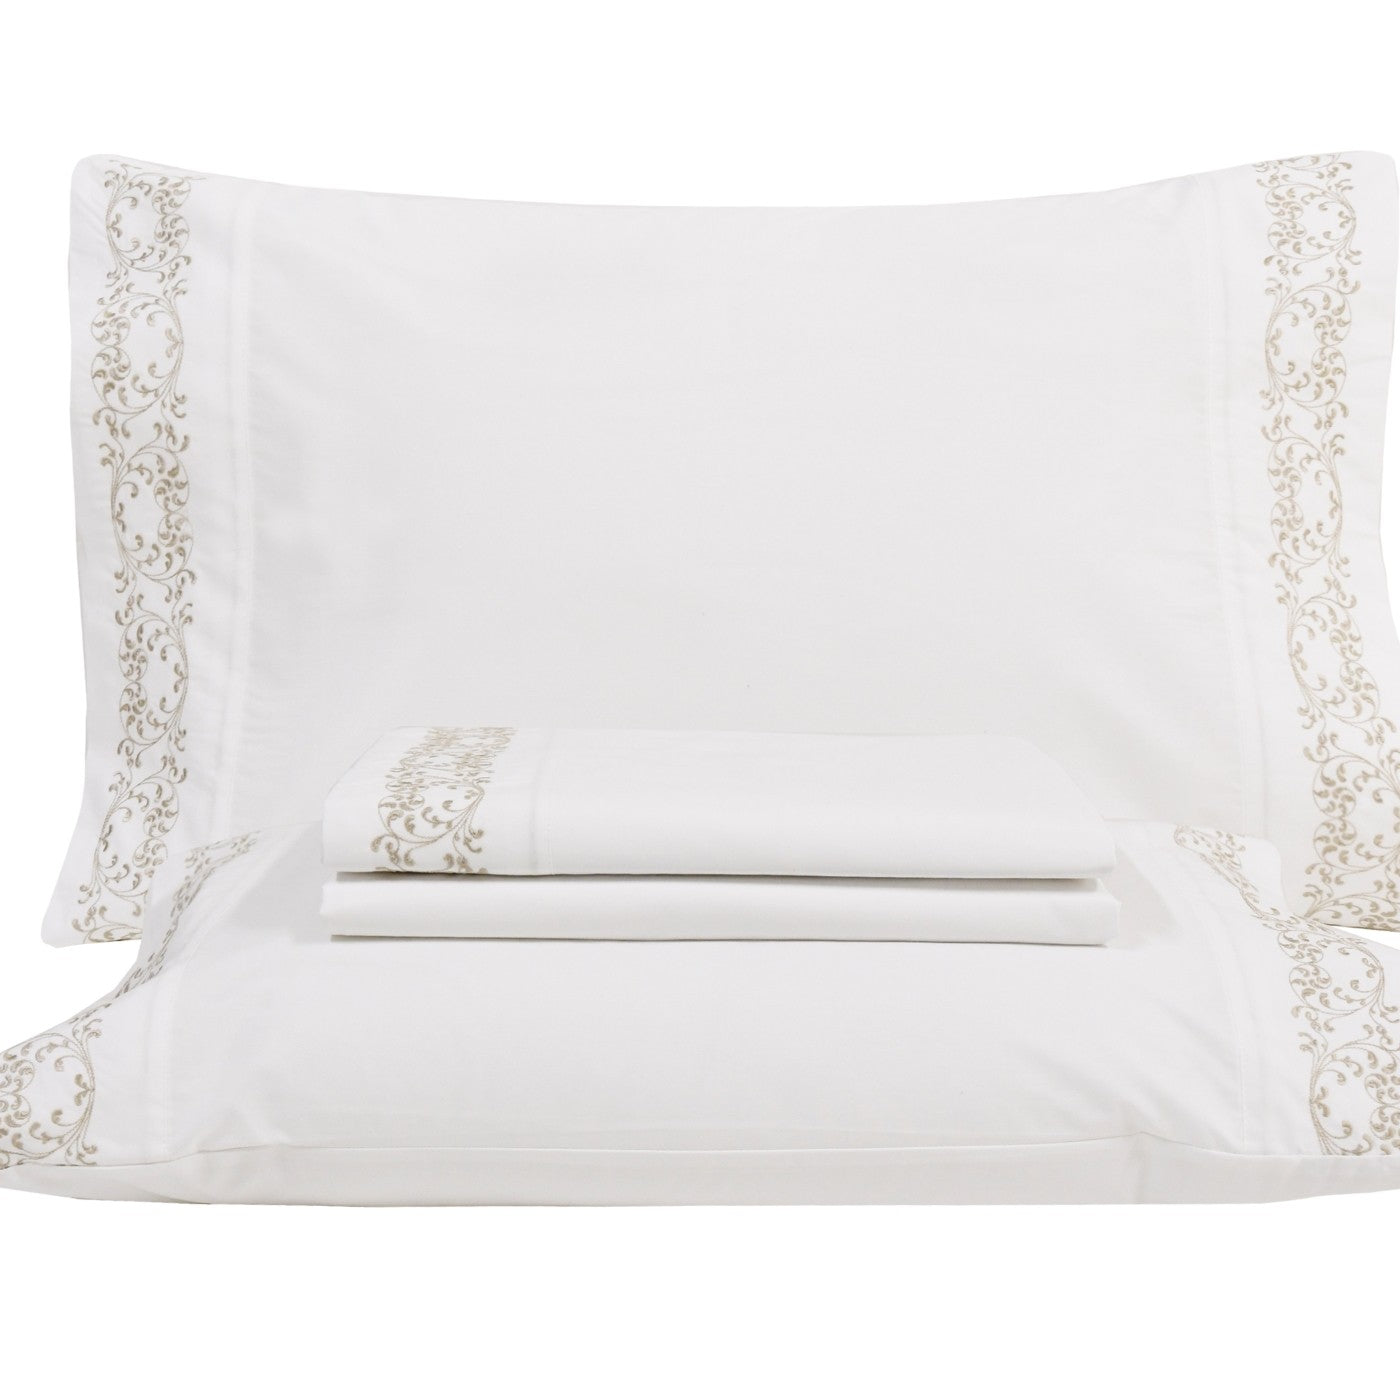 Orion Percale Sheet set